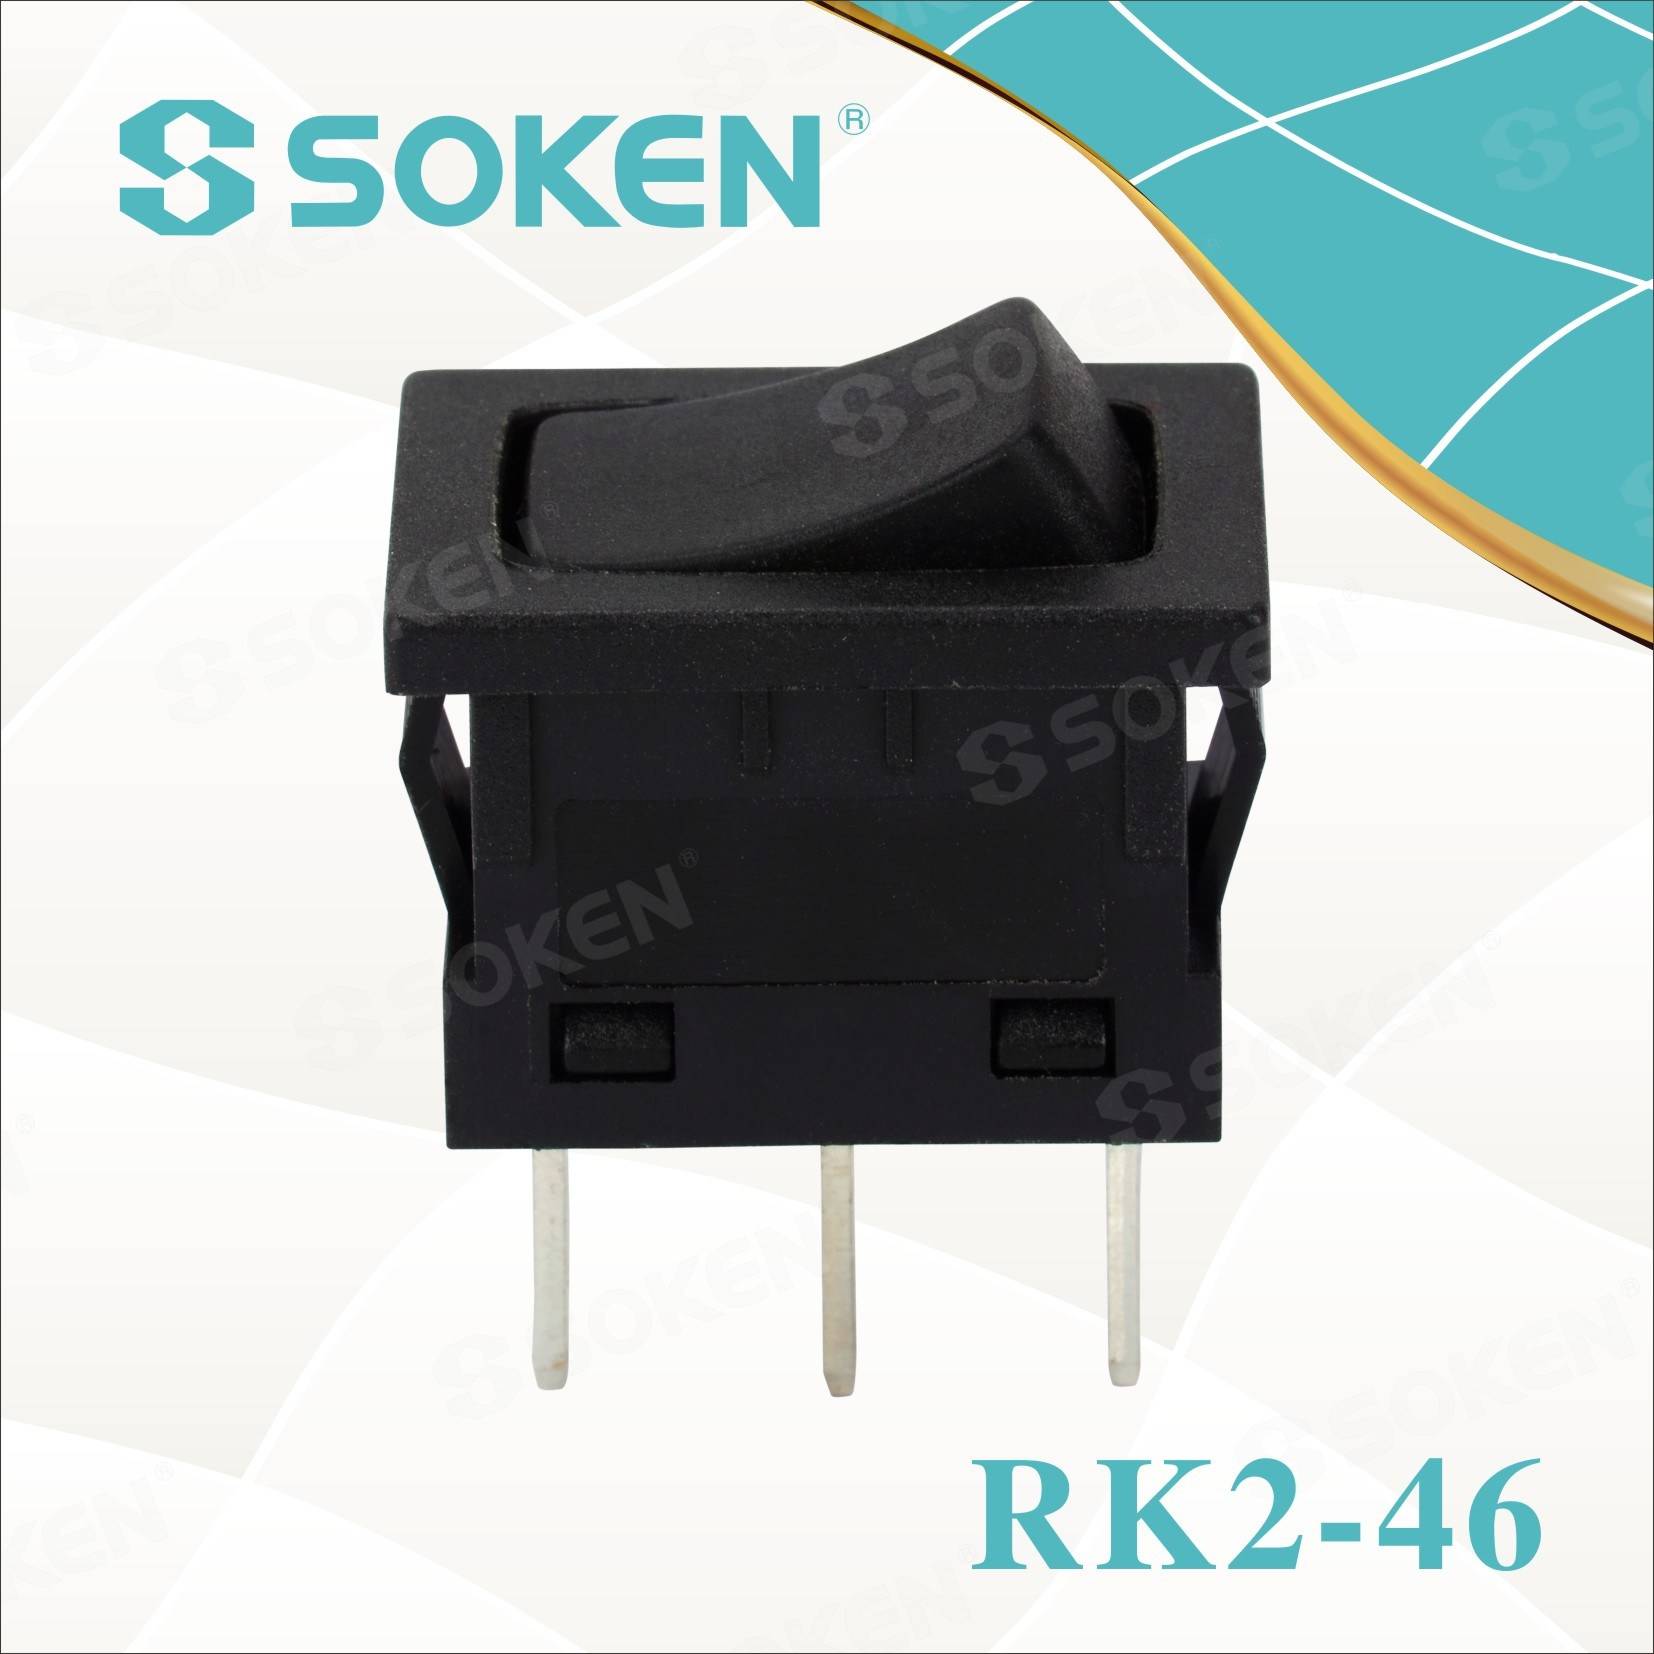 Hot Selling for Electric Oven Parts -
 Mini Rocker Switch – Master Soken Electrical